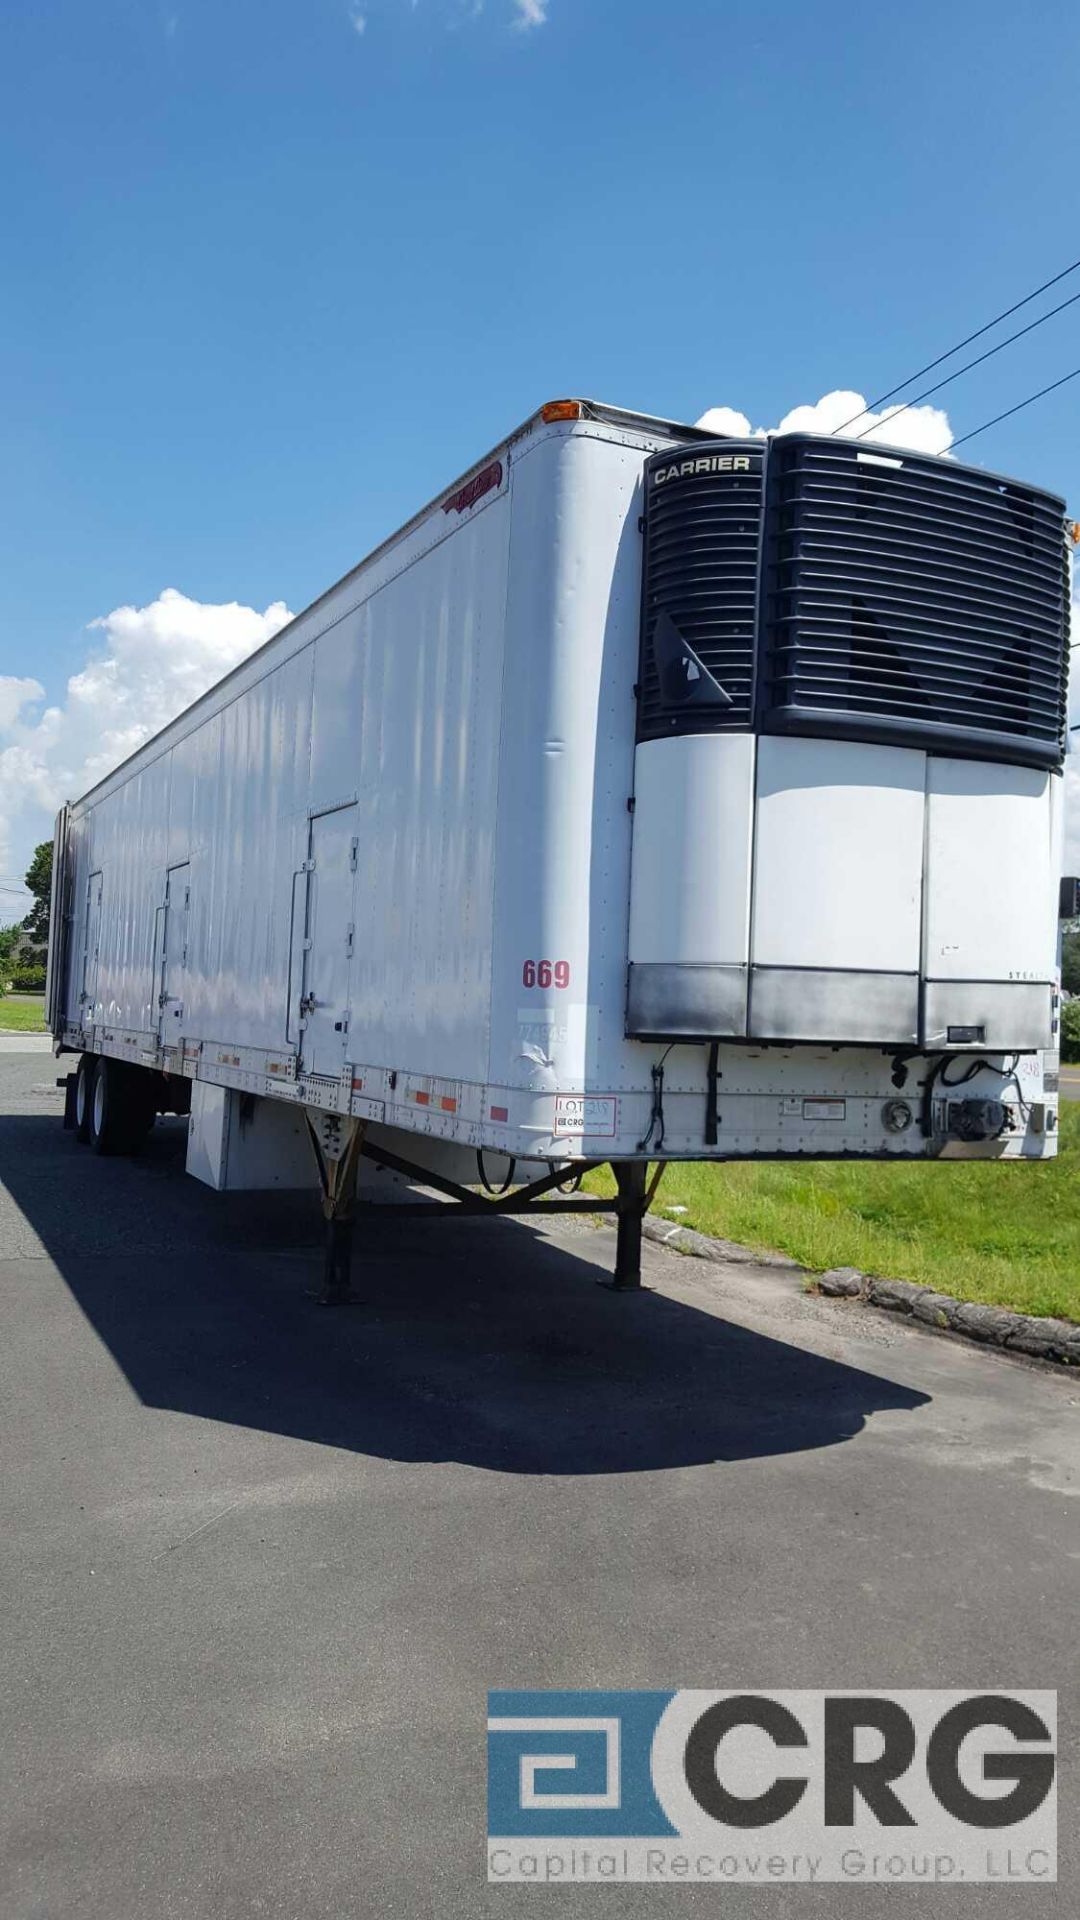 2003 Great Dane Multi Temp Refrigerated Semi Trailer - 45 Long, 102" wide, Carrier T1000, n/s - Image 6 of 7